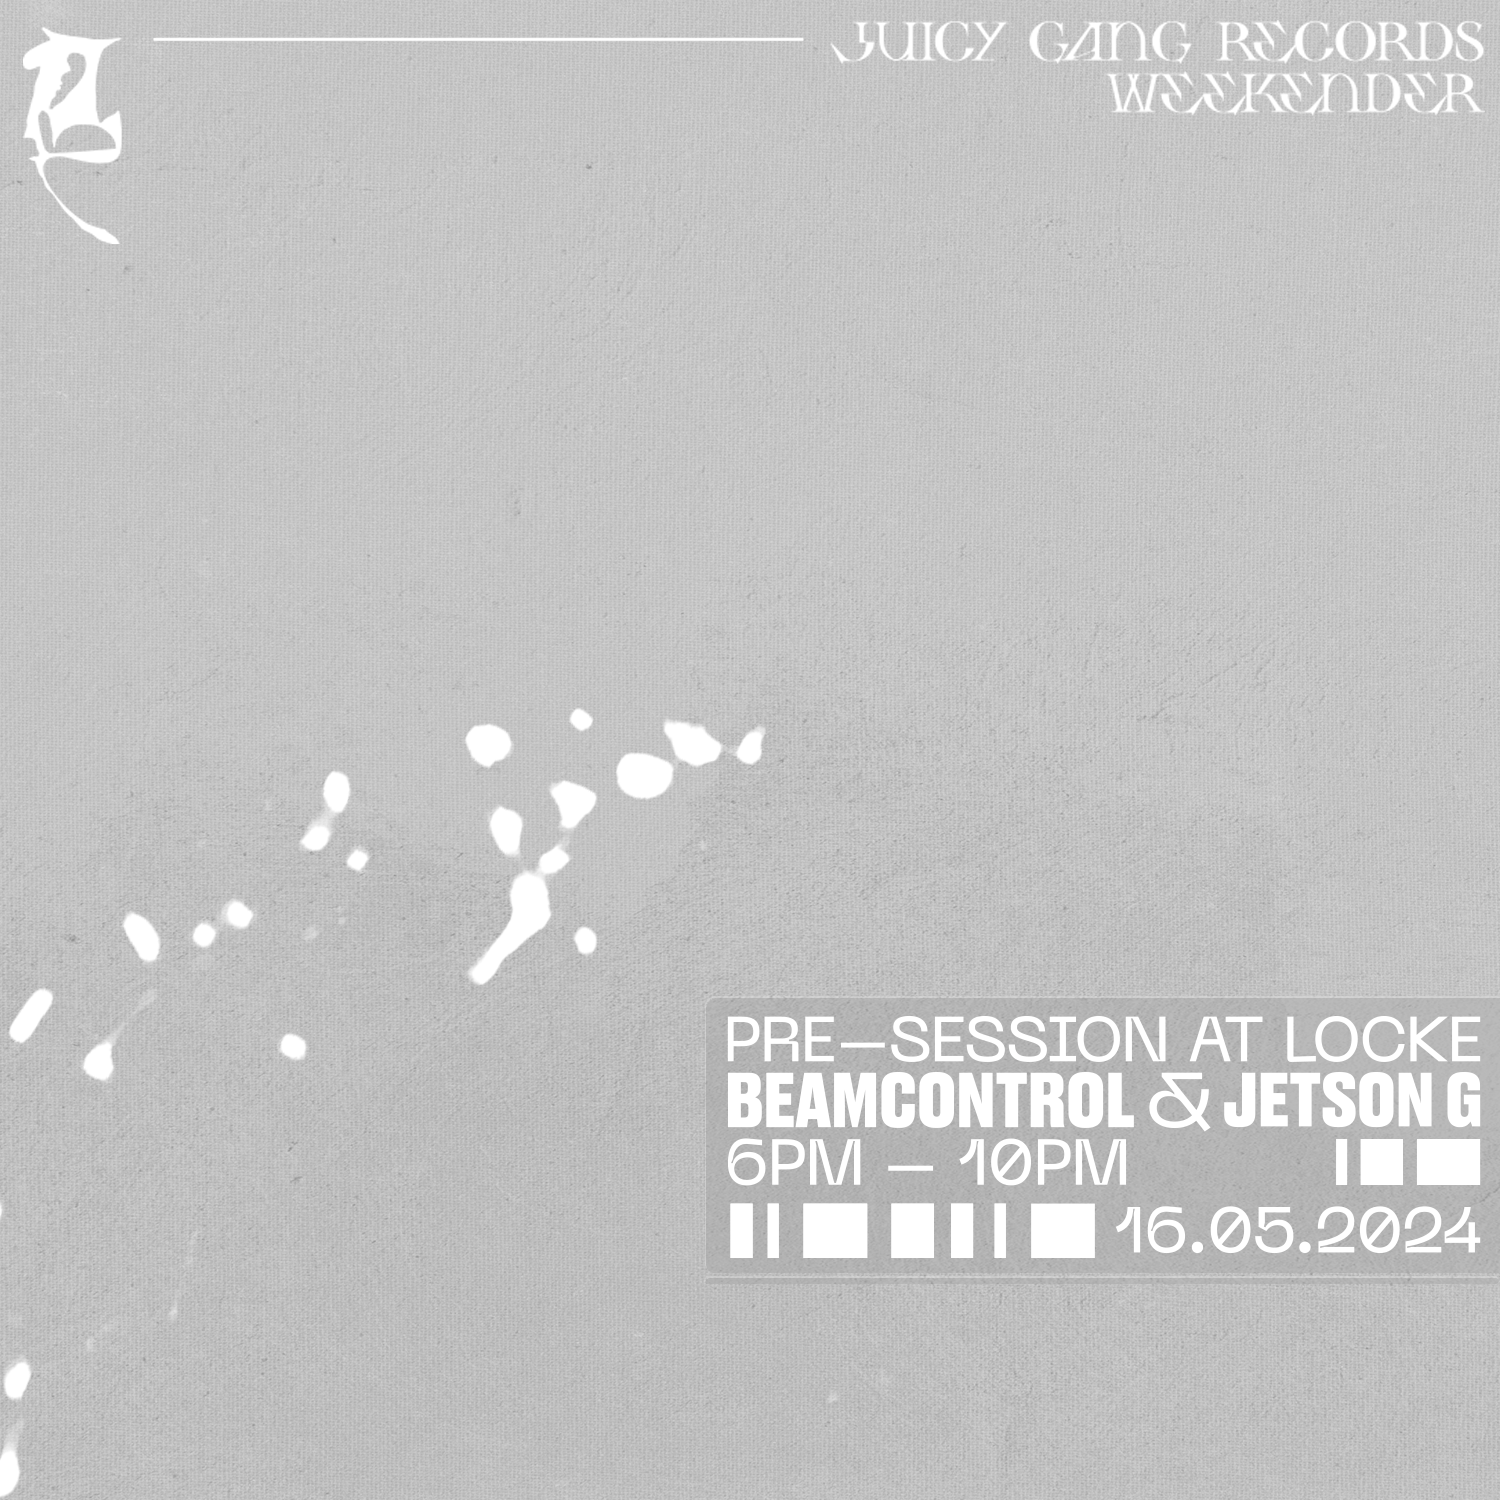 Juicy Gang Records Pre-Session w/ Beamcontrol and Jetson G - Flyer principal